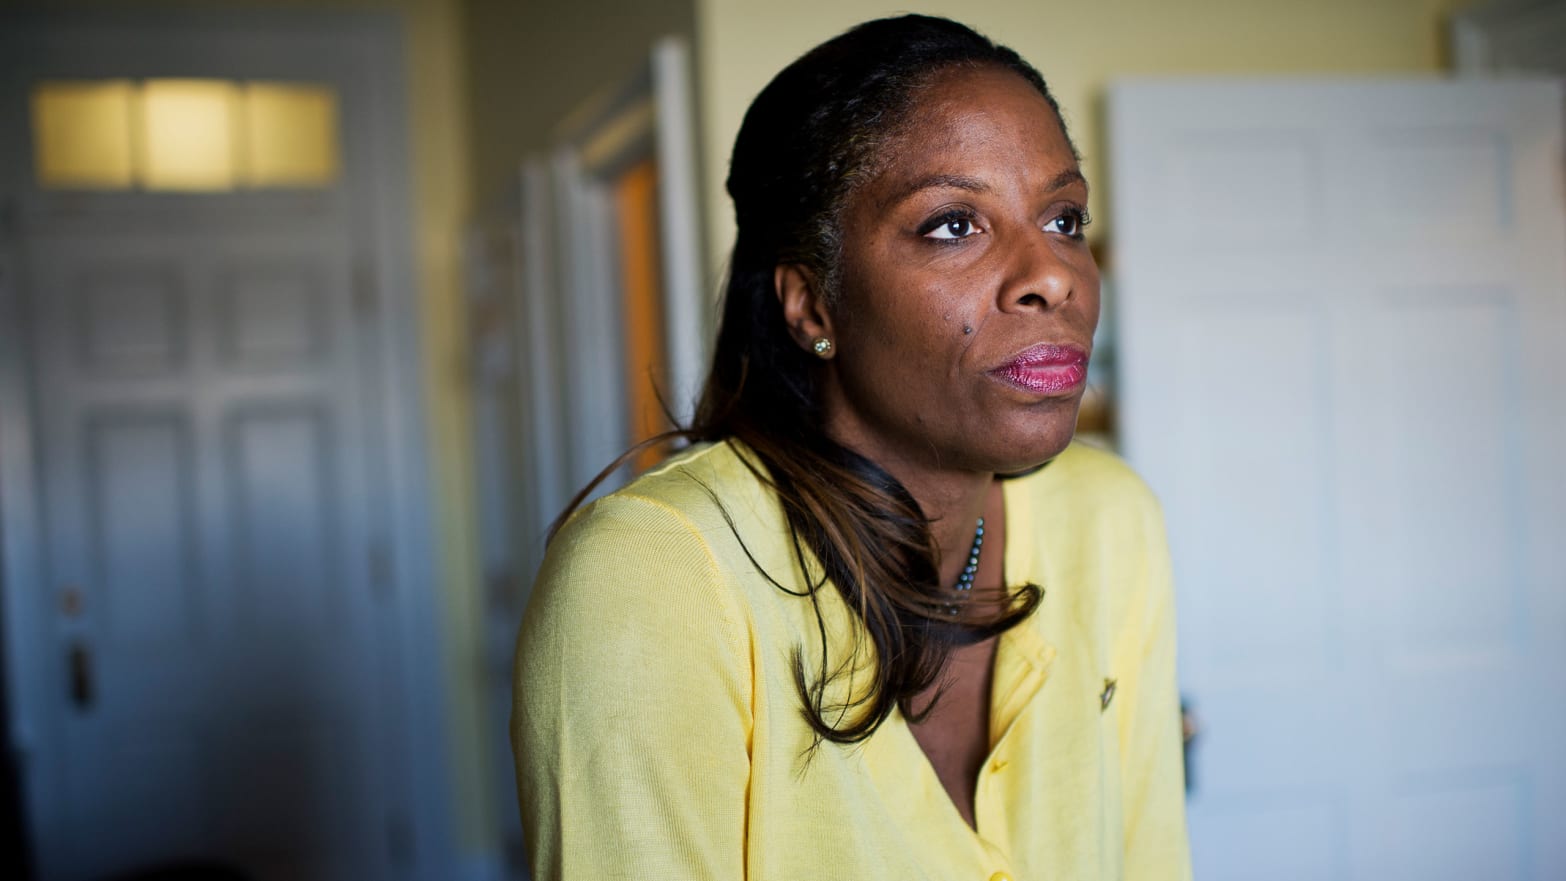 Brother Daughter Porn - Congresswoman Stacey Plaskett Opens Up About Being a Revenge ...